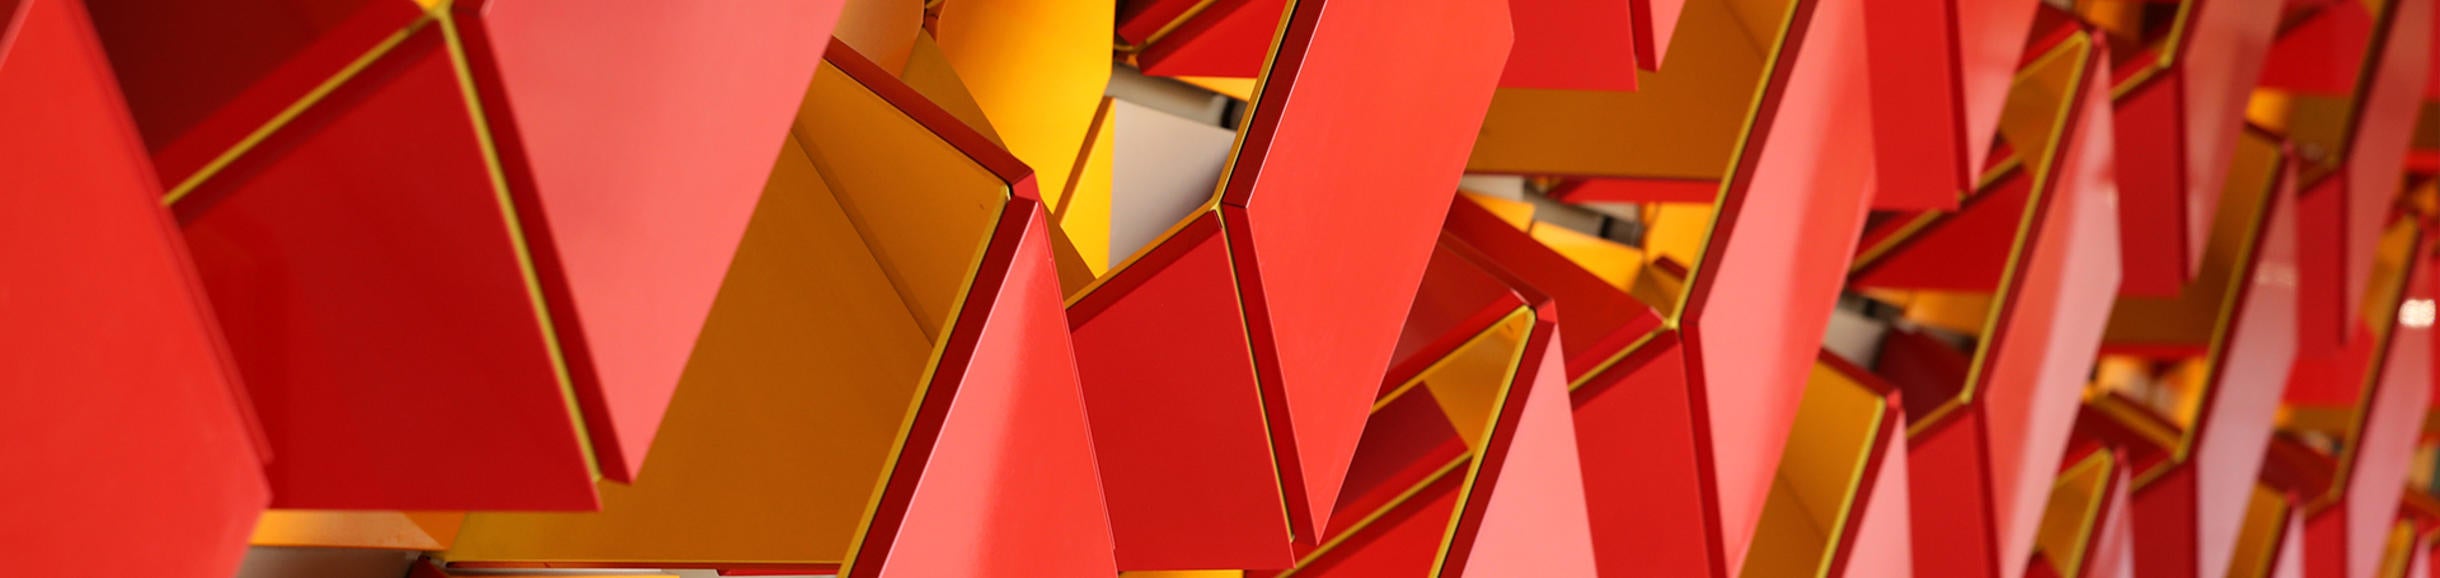 Red Geometric Shapes